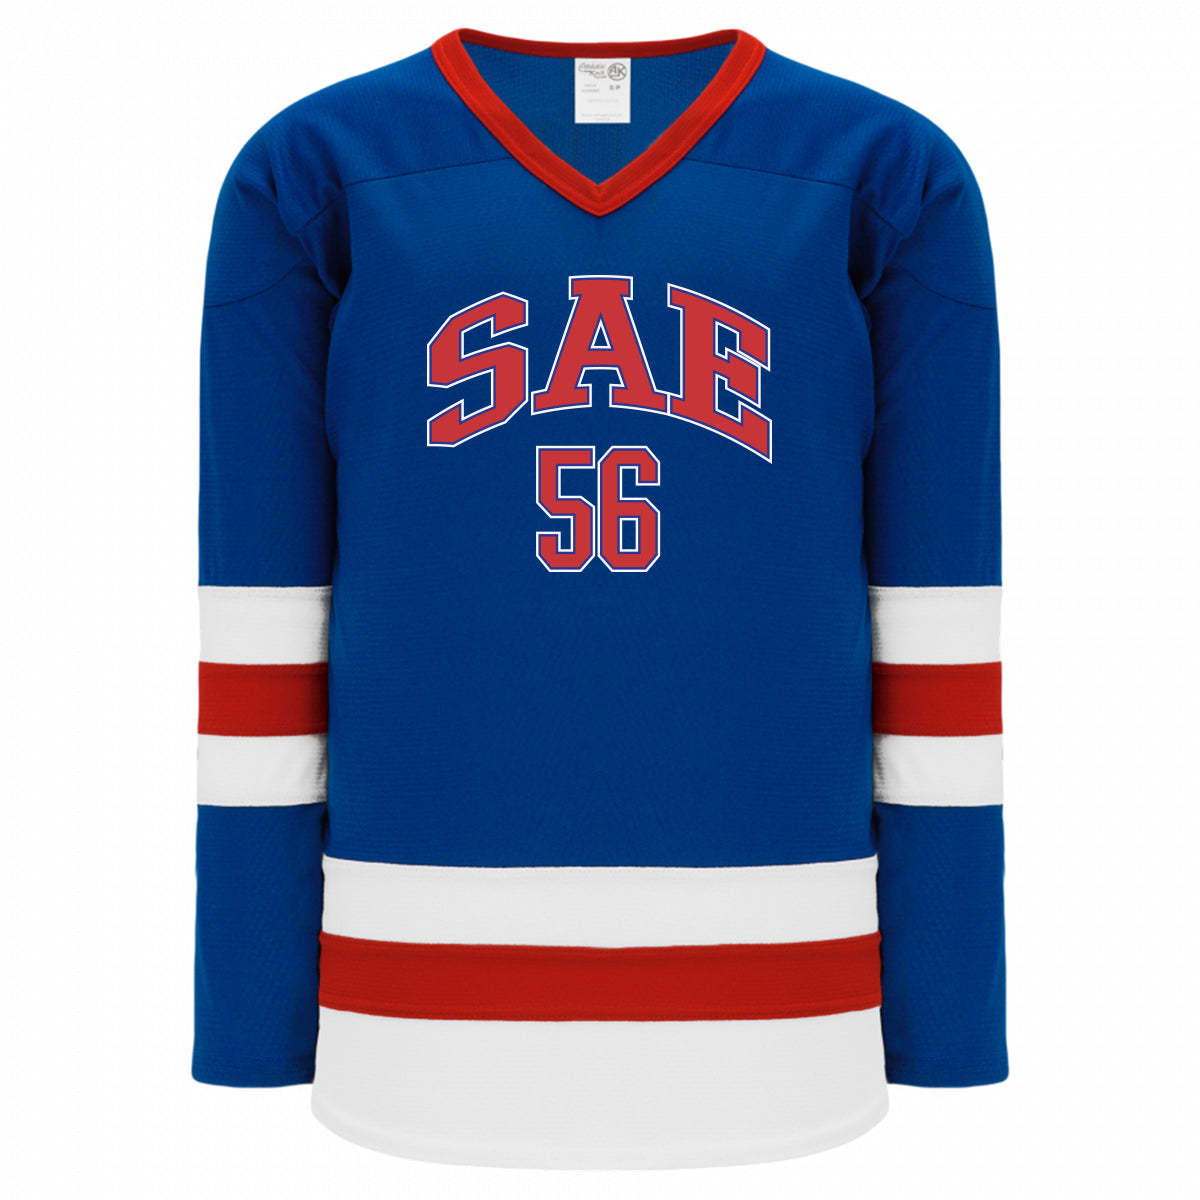 Montreal Canadiens Jerseys For Sale Online